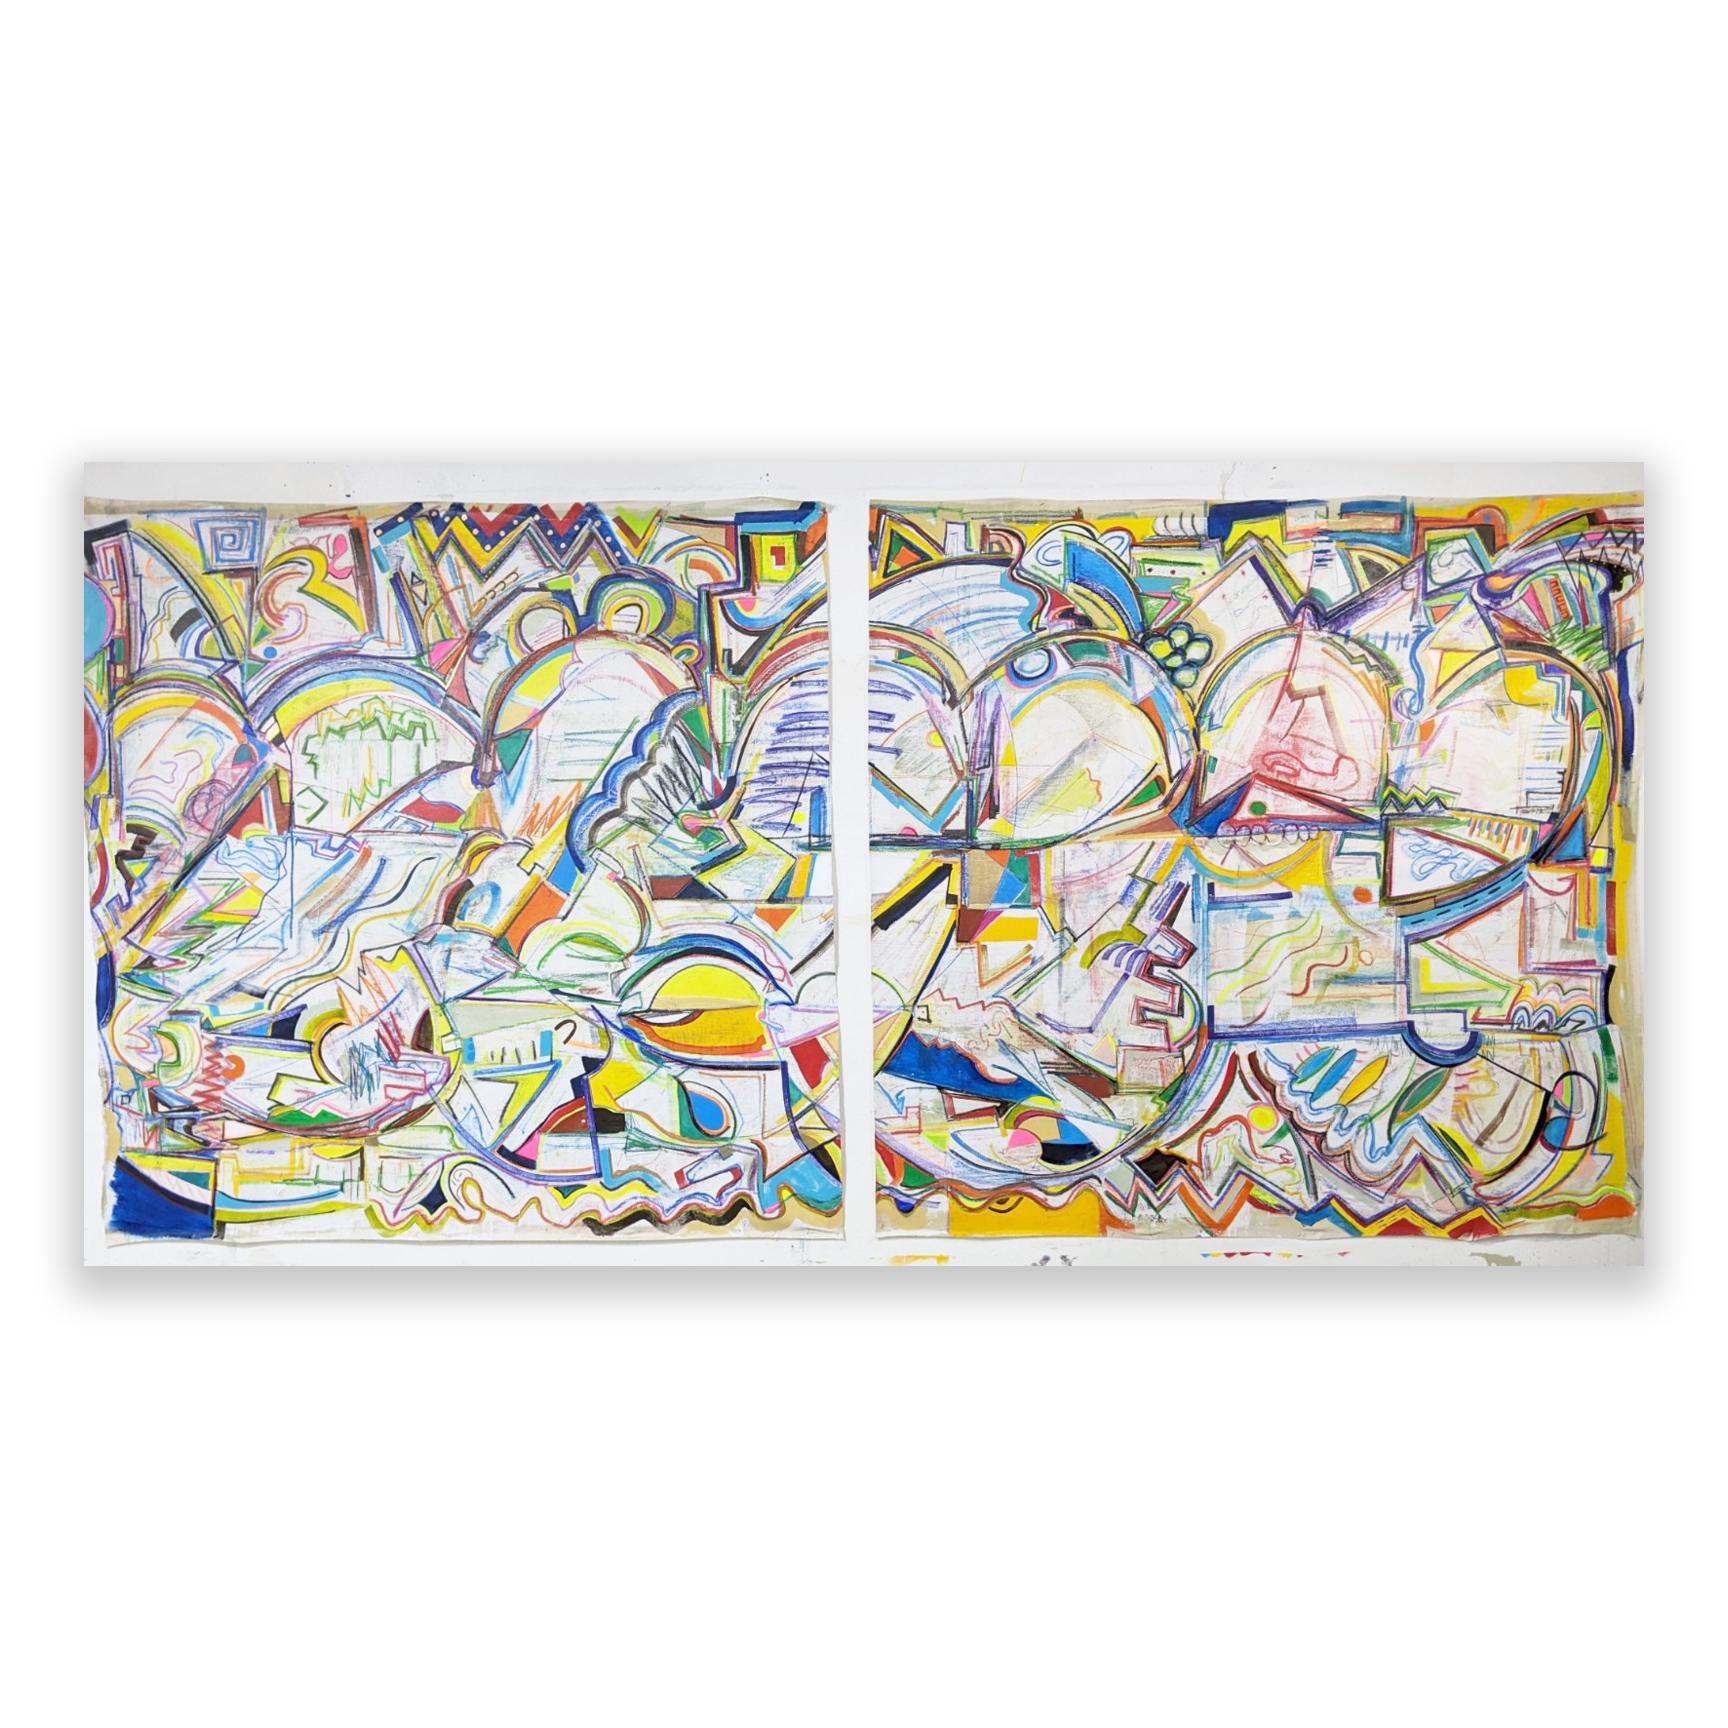 My Momen Diptych by Joseph Conrad-Ferm, 2022
Mixed Media 
64 × 130 in 
162.6 × 330.2 cm

Mixed media abstract painting on canvas by NY-based artist Joseph Conrad-Ferm. 

Shipping is not included. See our shipping policies. Please contact us for